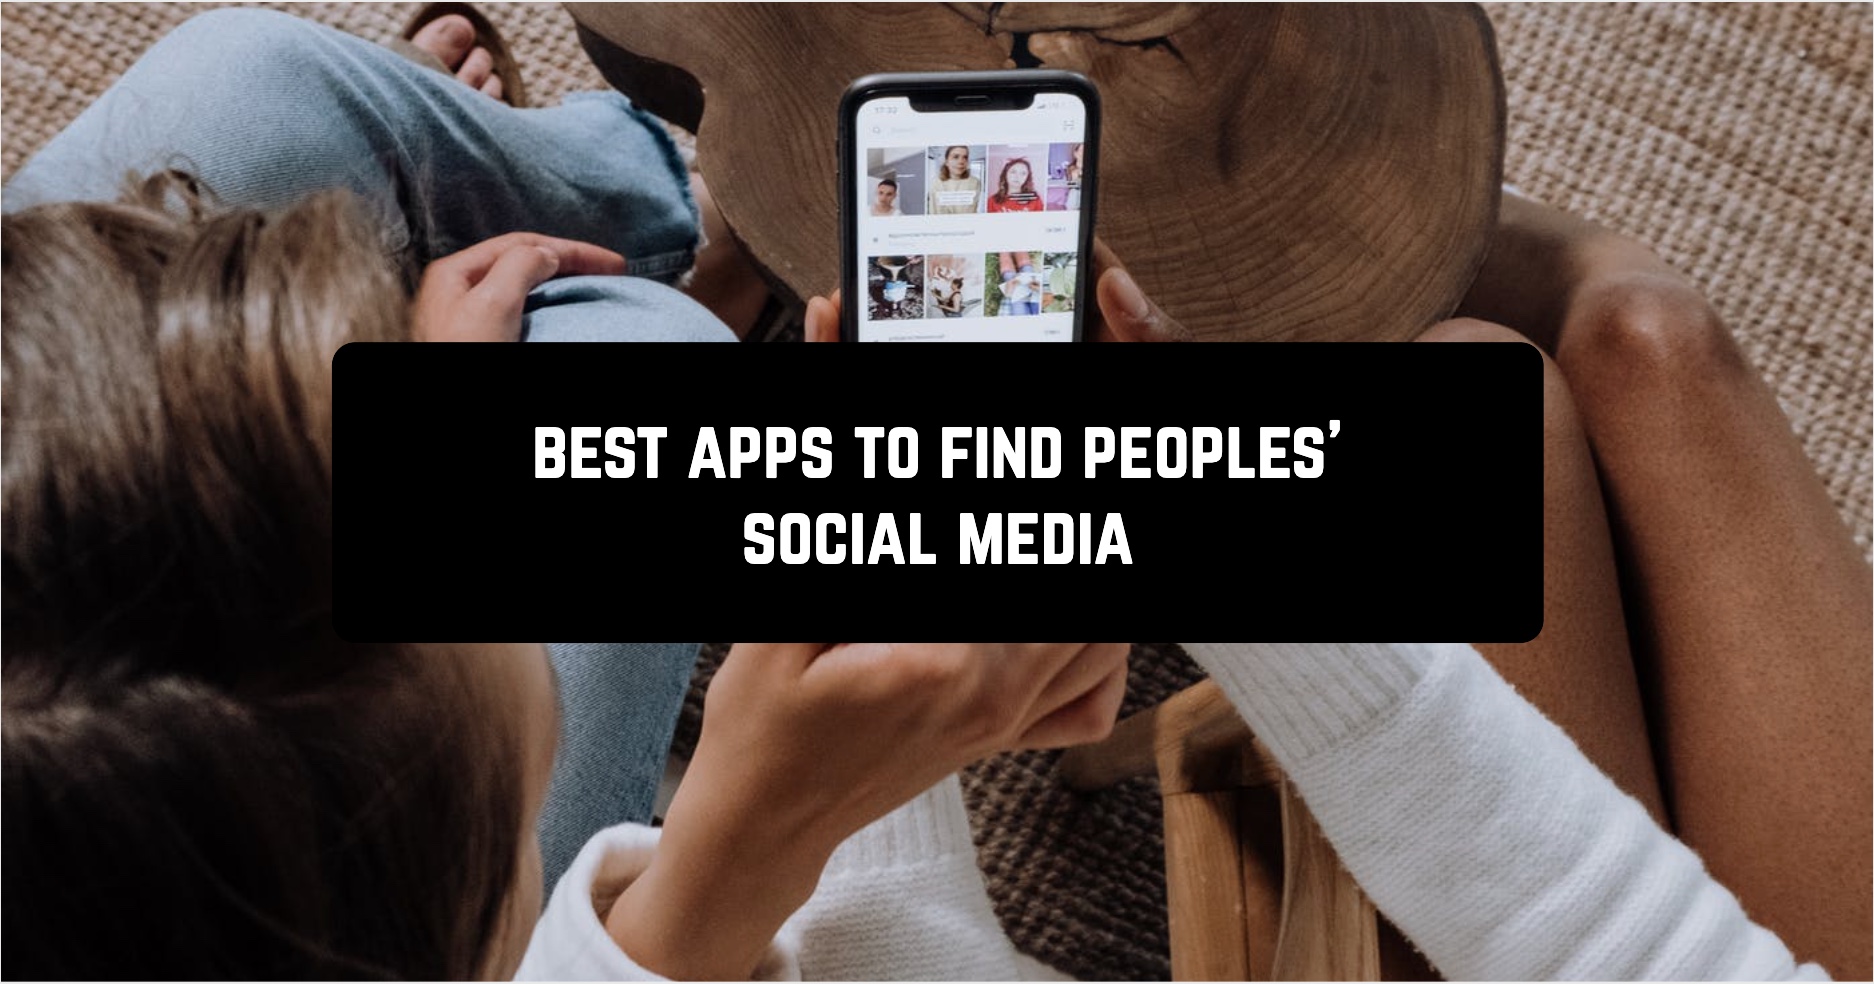 Best apps to find peoples' social media